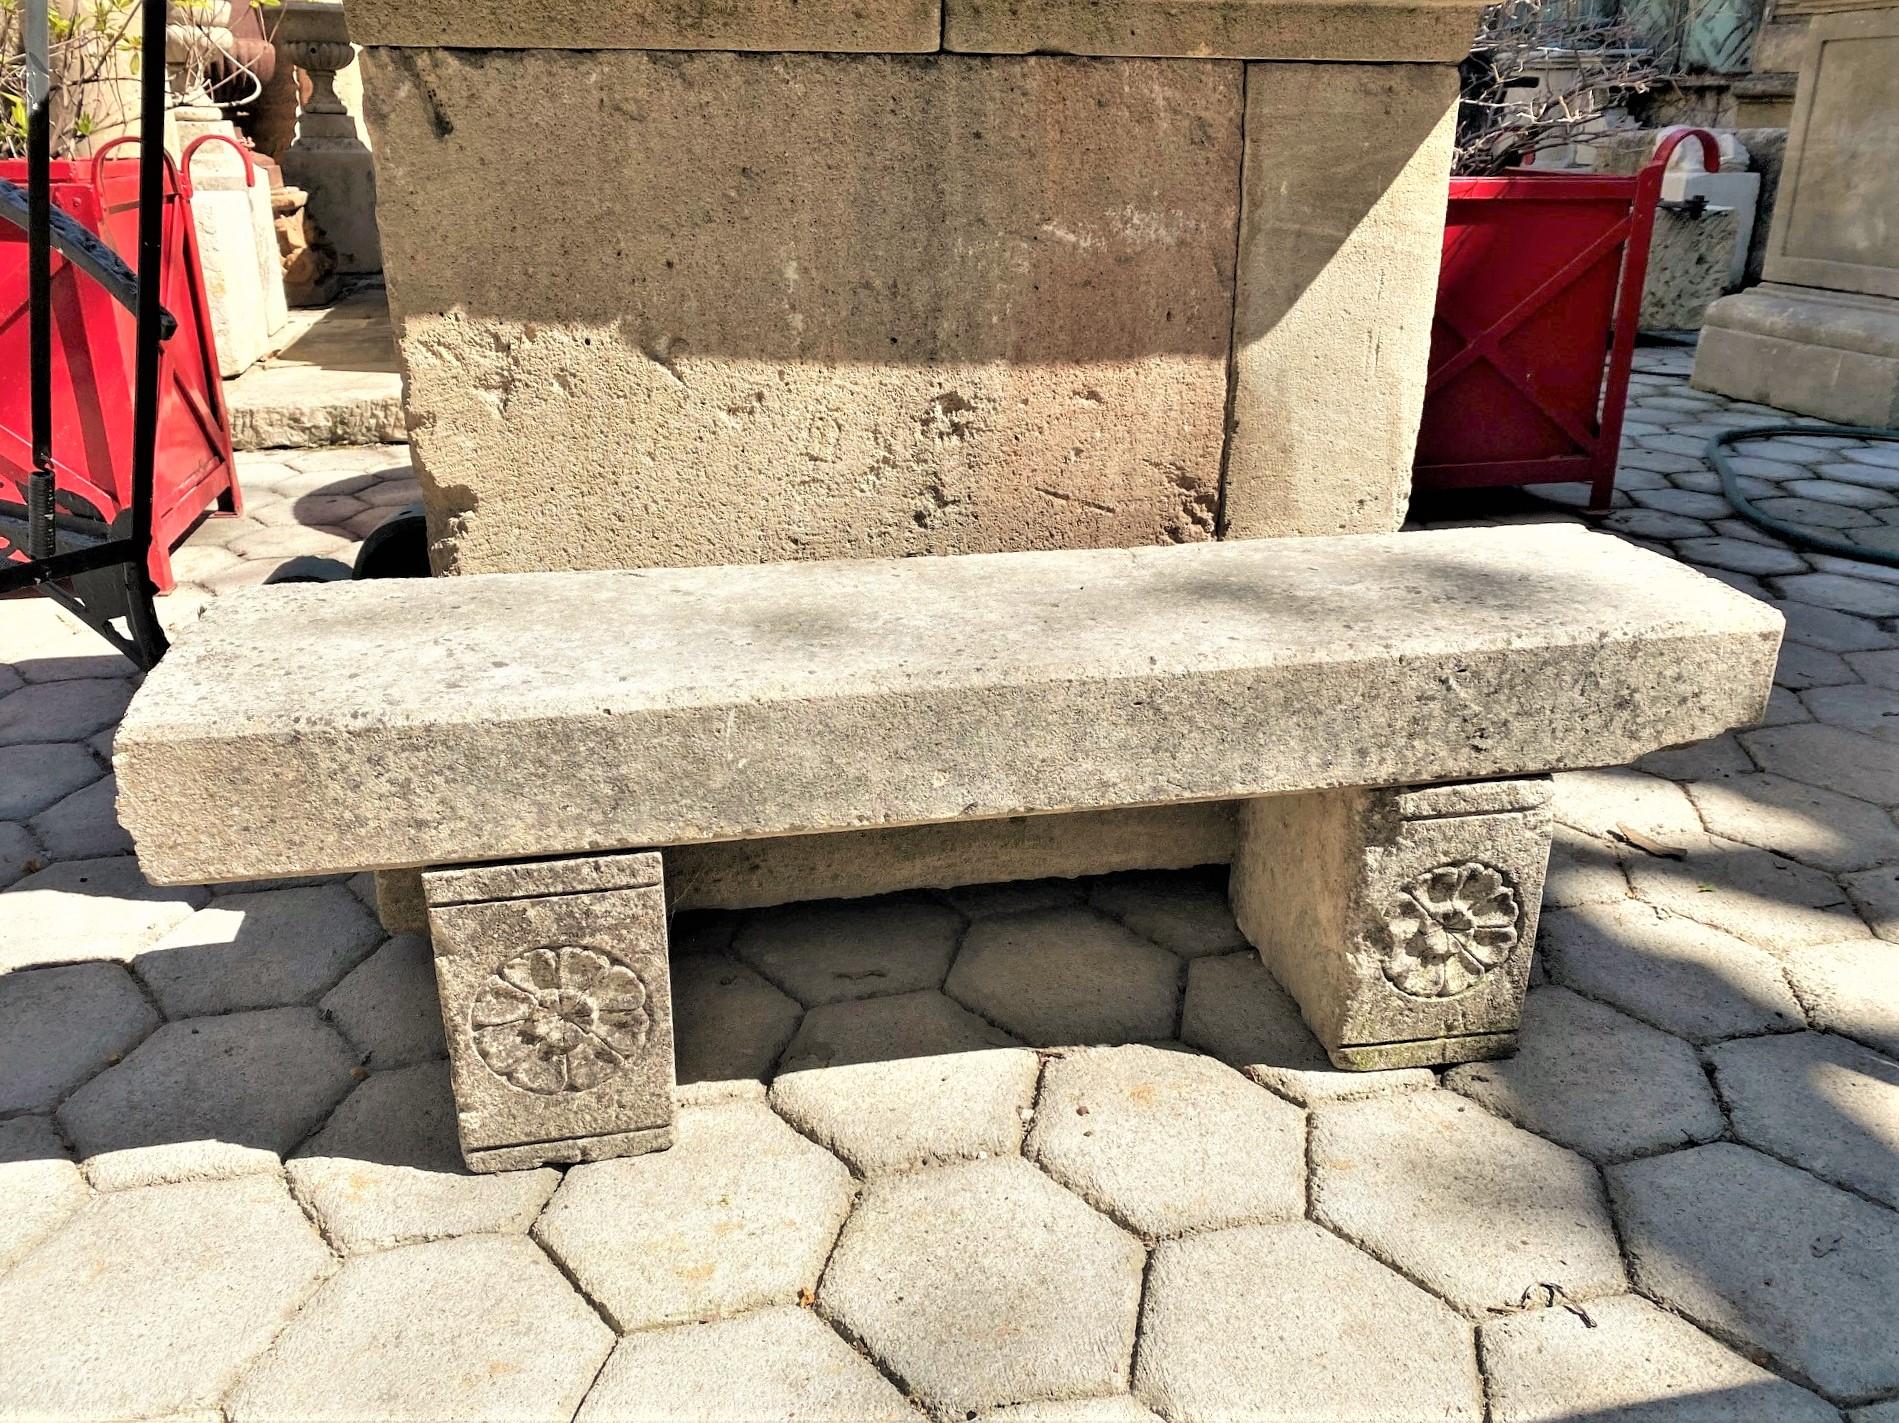 Hand carved stone rustic mudroom garden bench seat antique indoor outdoor LA CA. Beautiful 19th century hand carved stone elements small and low mudroom shoe garden bench 4 inch thick stone top slab bench. This beautiful Seat is a garden bench with